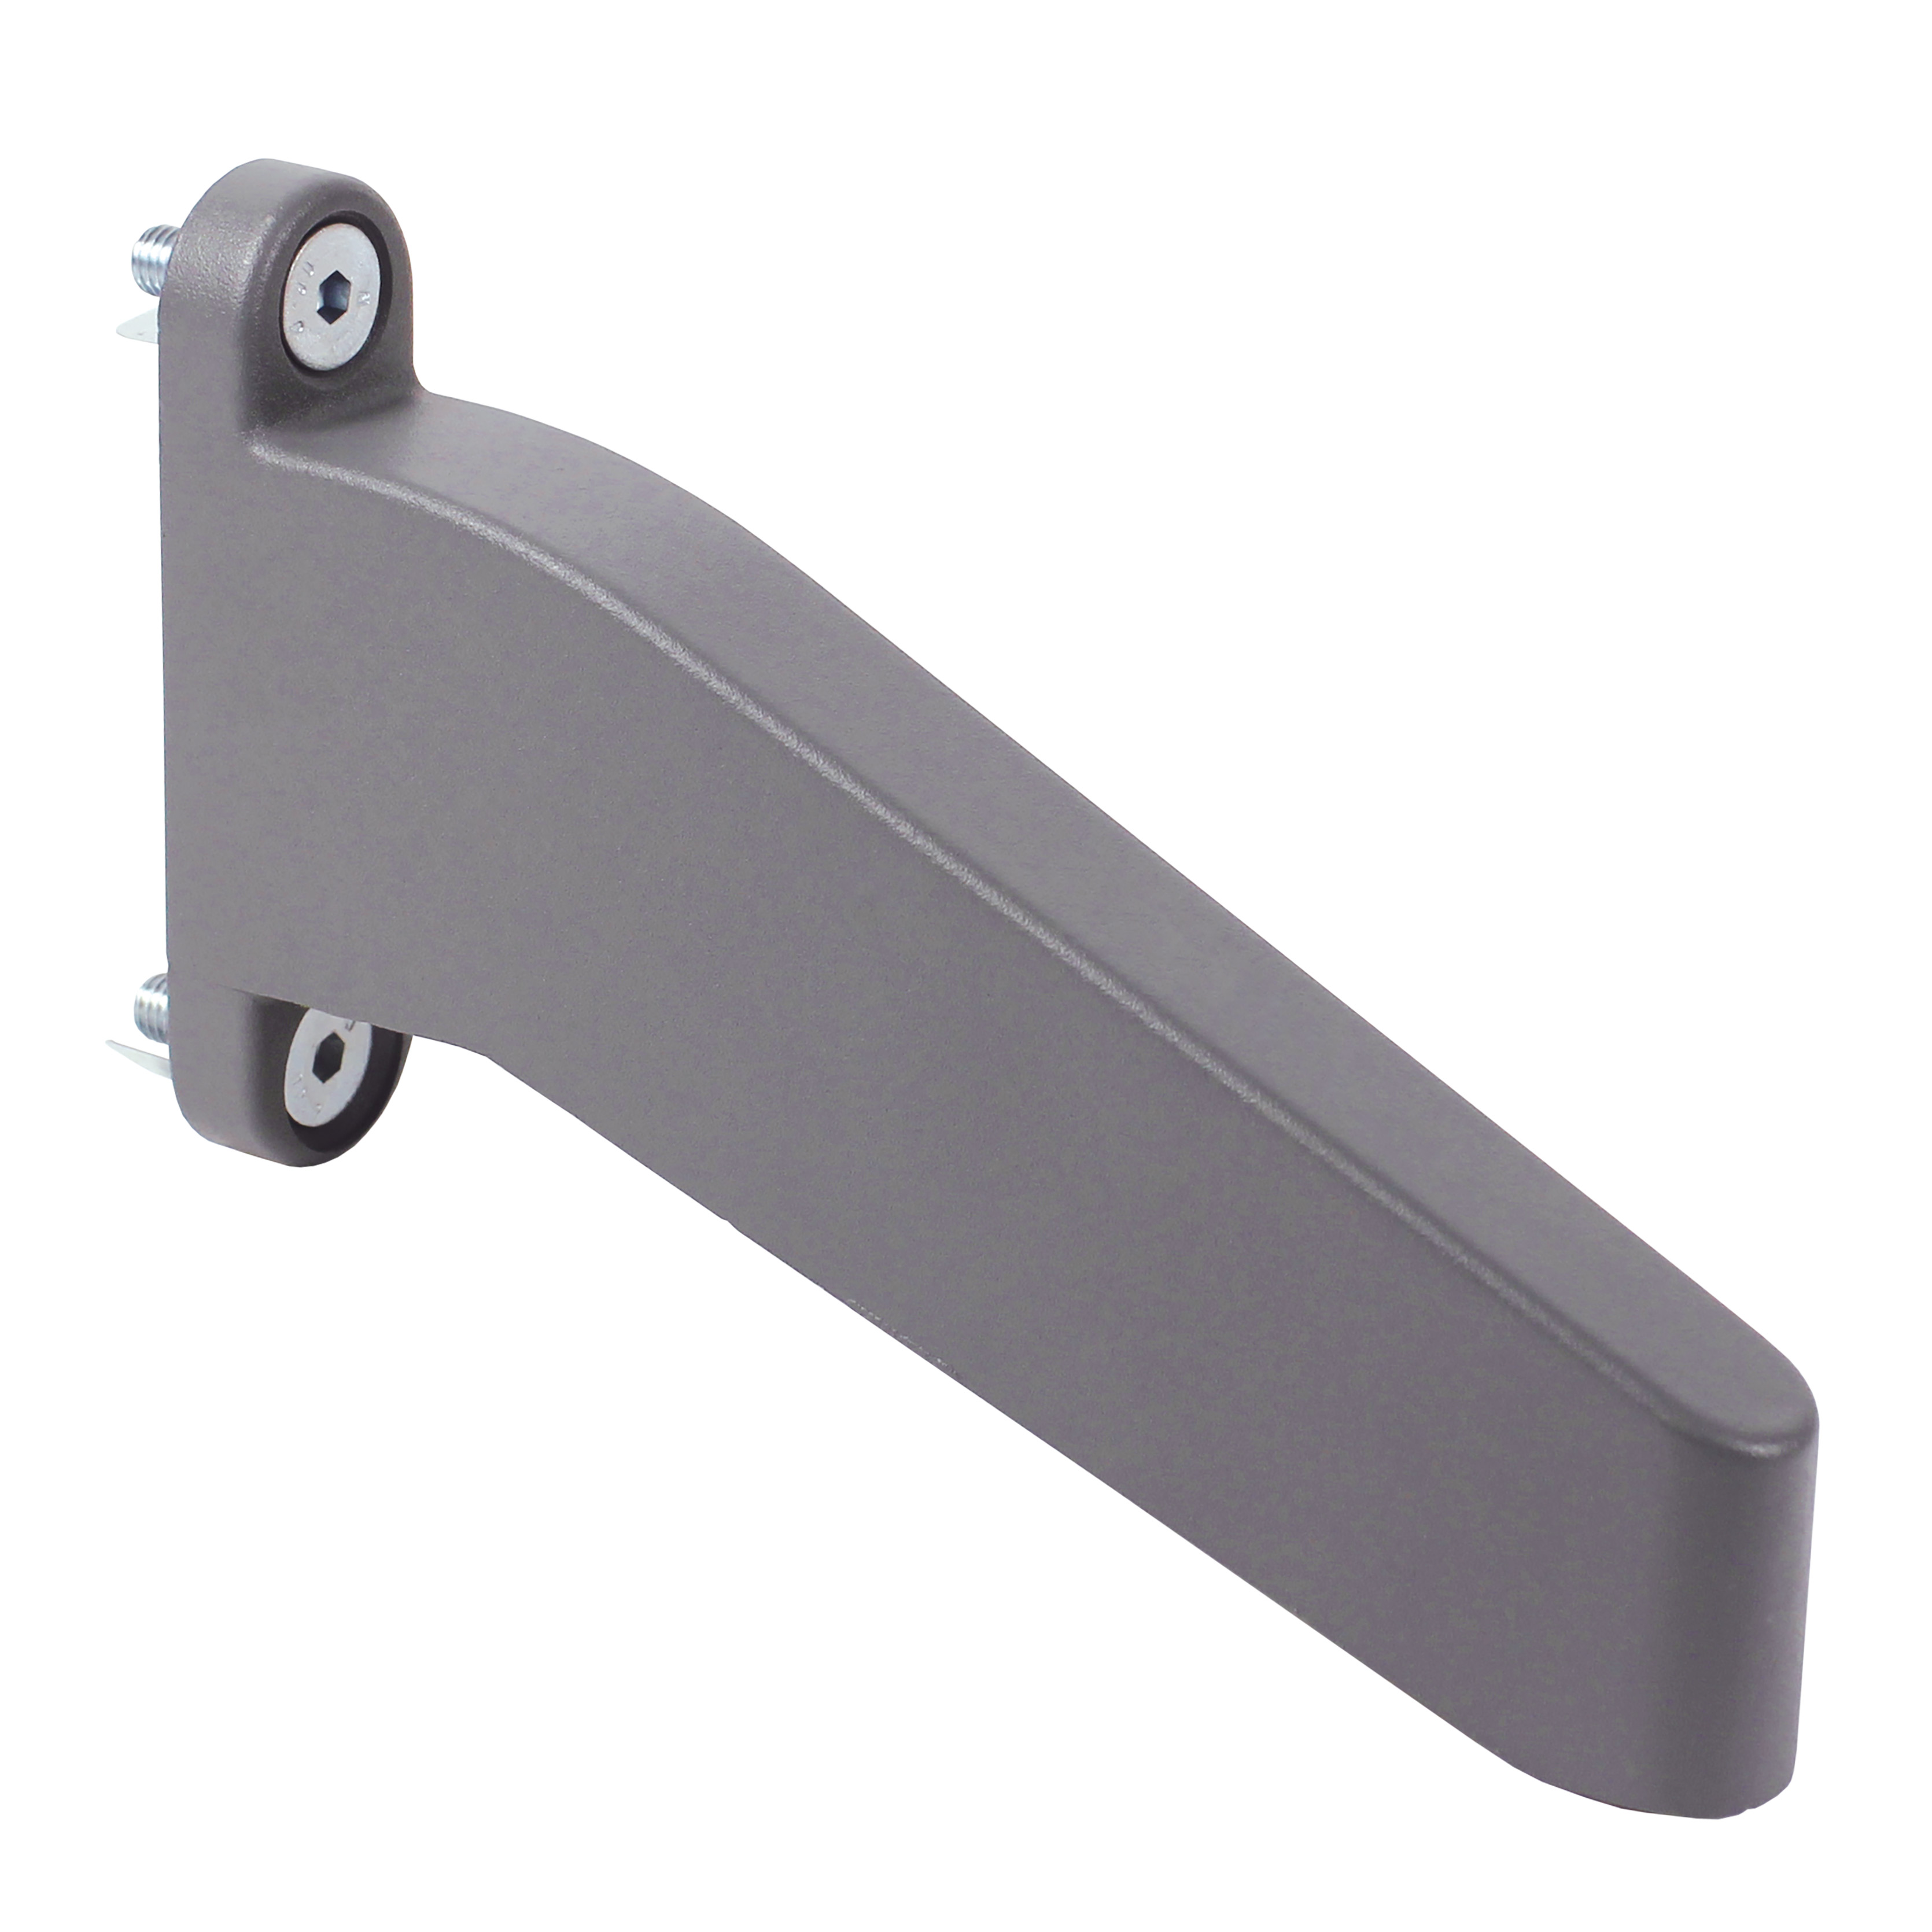 Aluminium profile feet support - For feet or casters -  - 